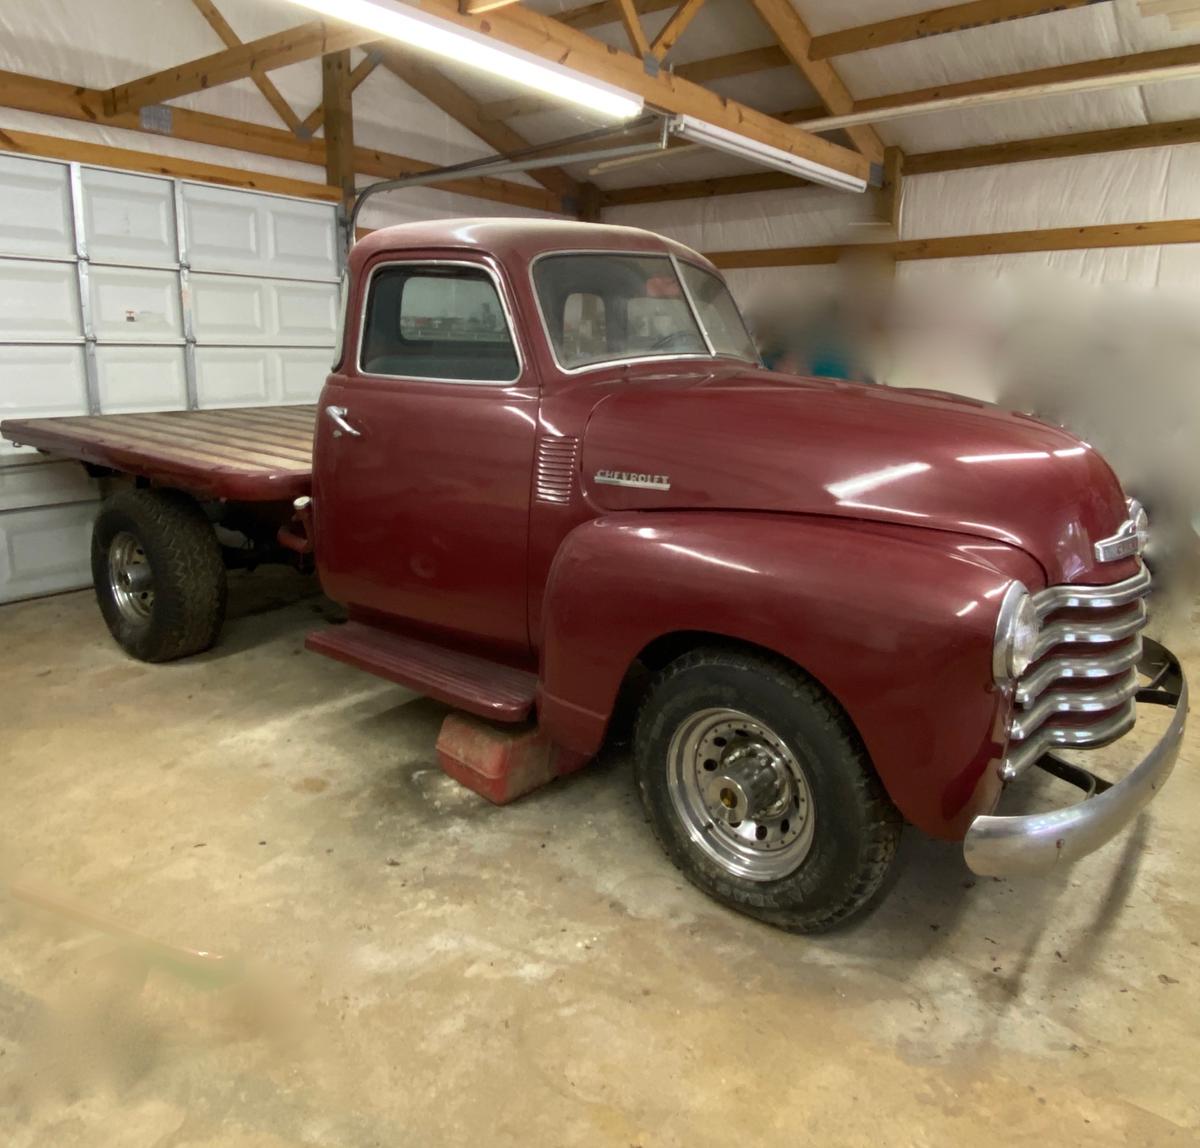 1948 Five Window Chevy Stake Bed Truck - 3/4 Ton, 6 Cylinder, 4 Speed, Short Wheelbase